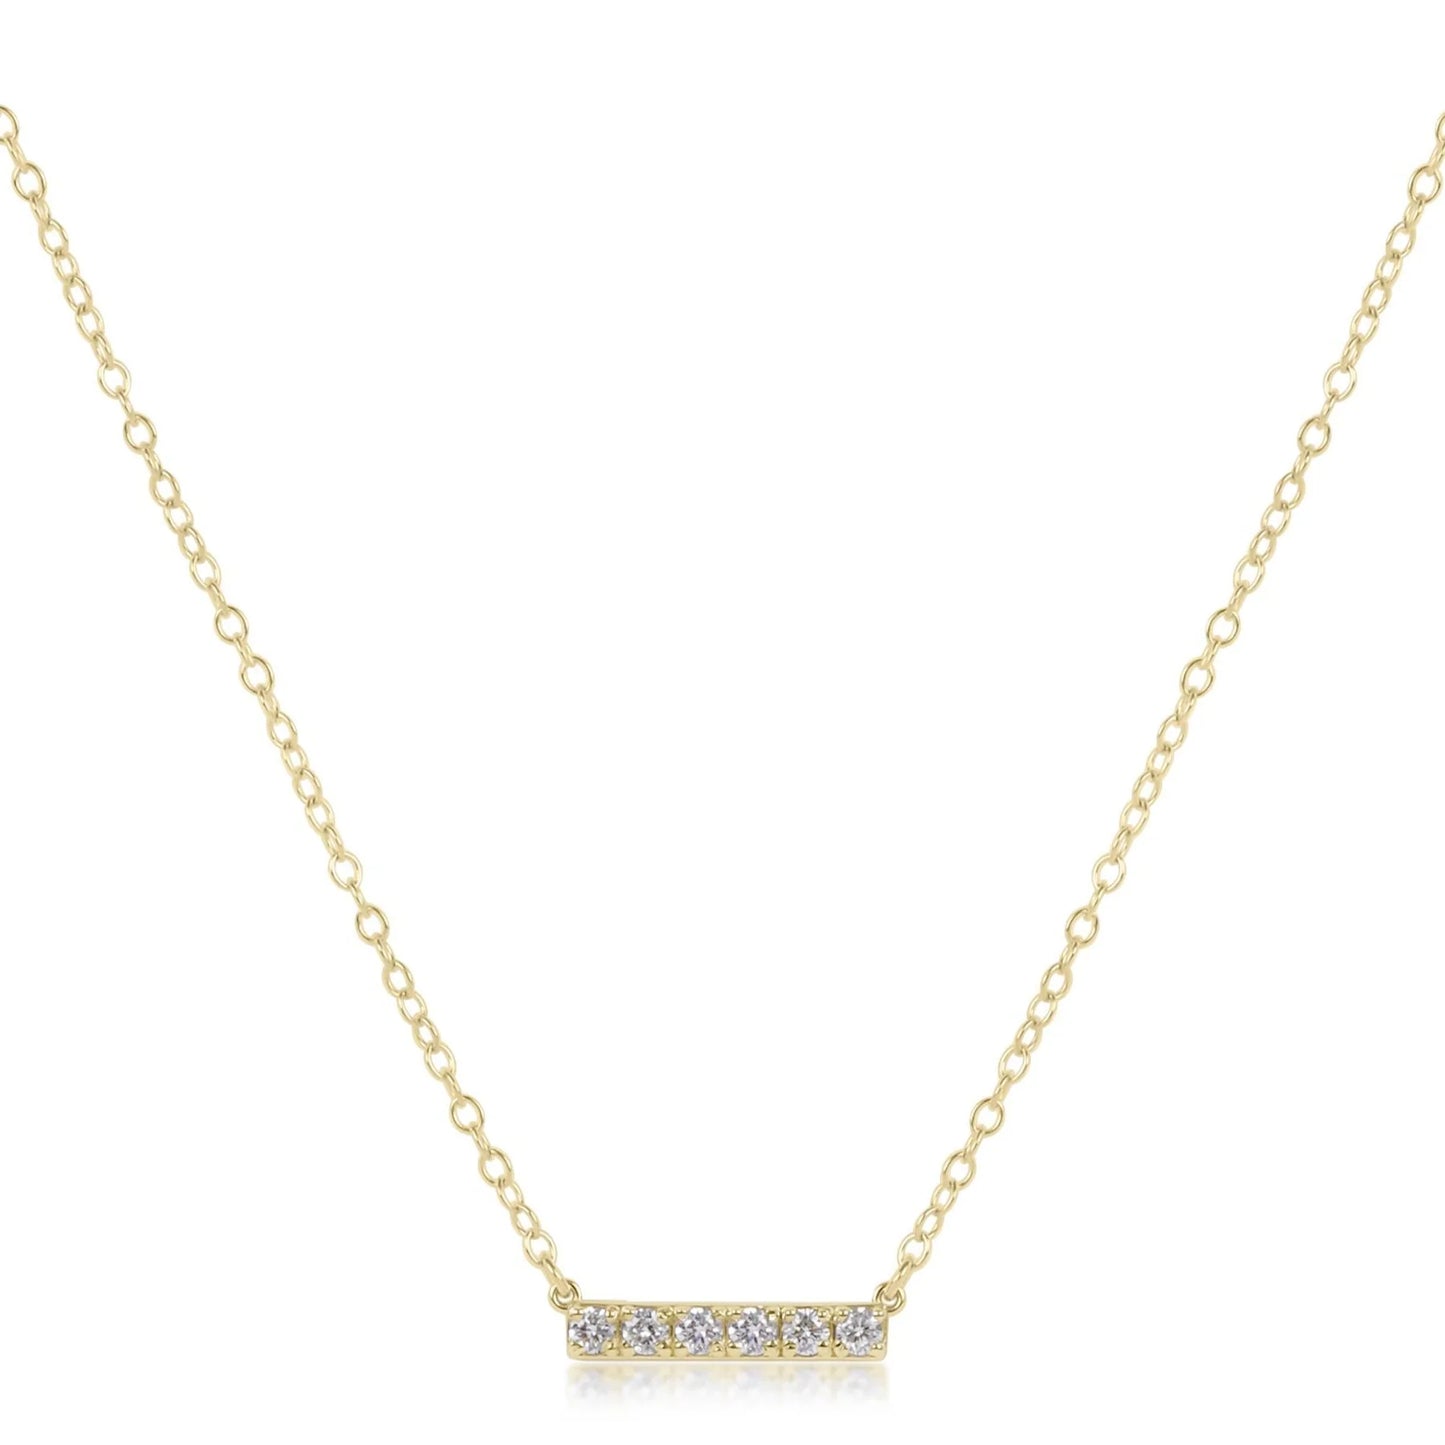 14kt gold and diamond significance bar necklace - six